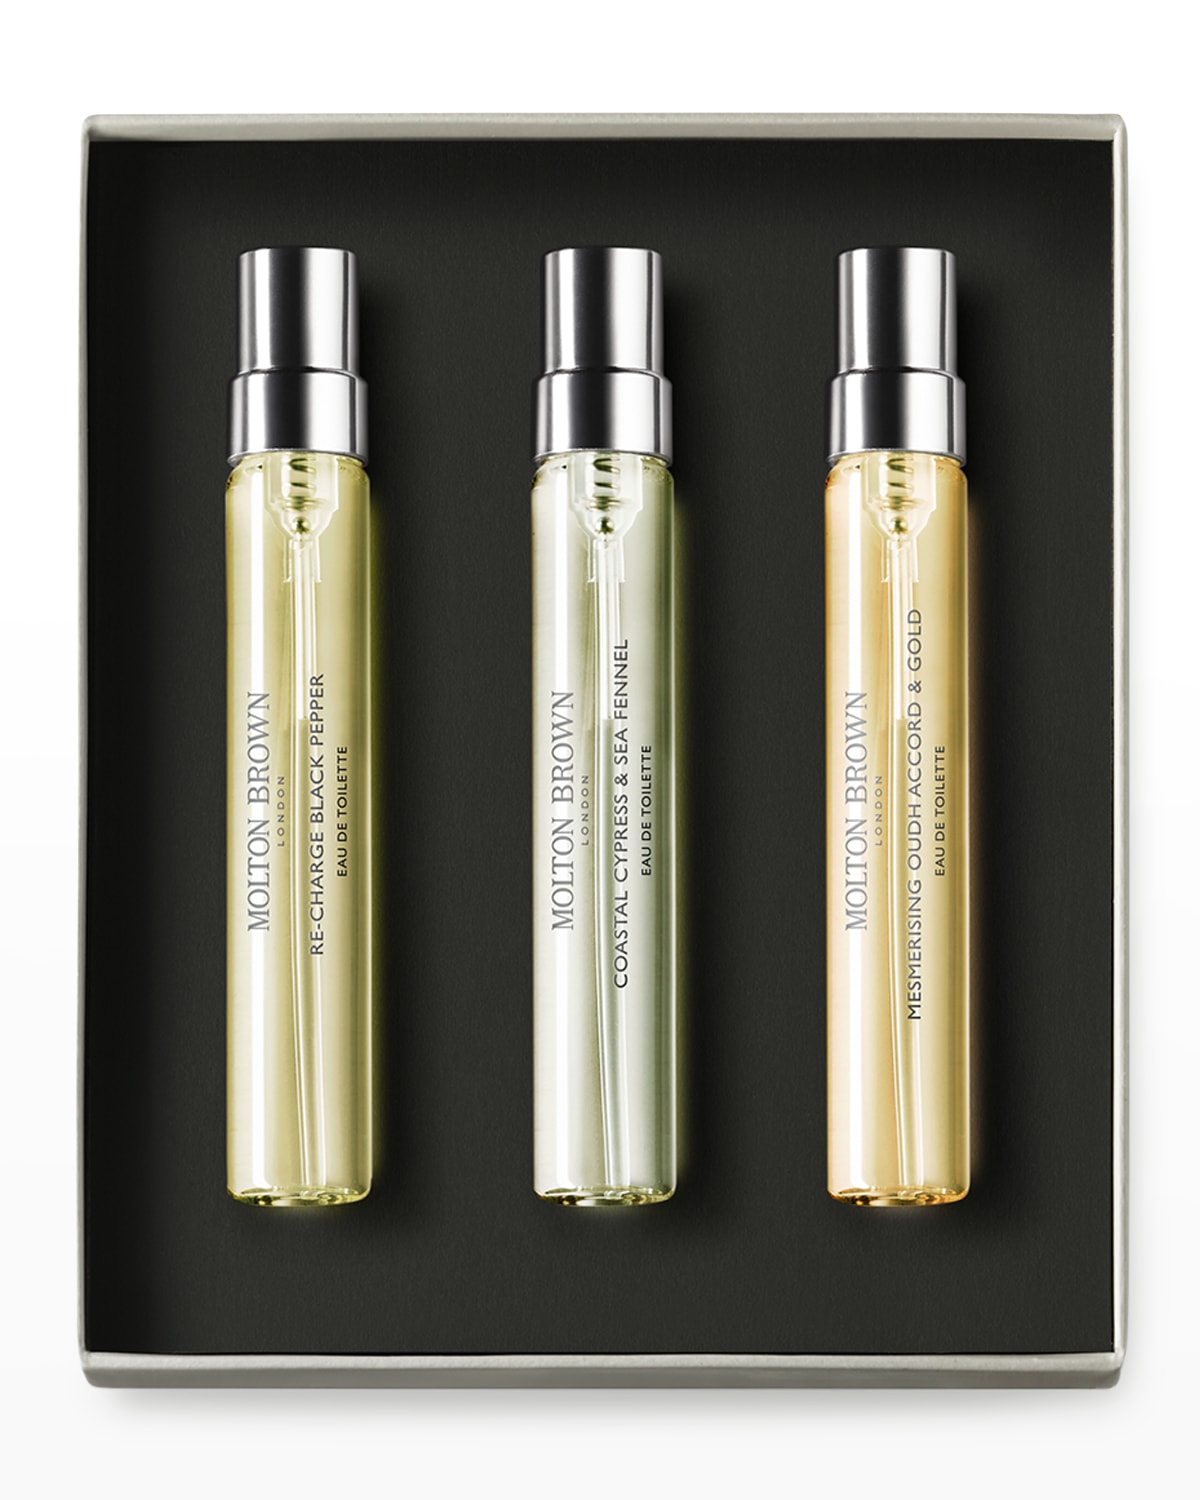 Woody & Aromatic Fragrance Discovery Set